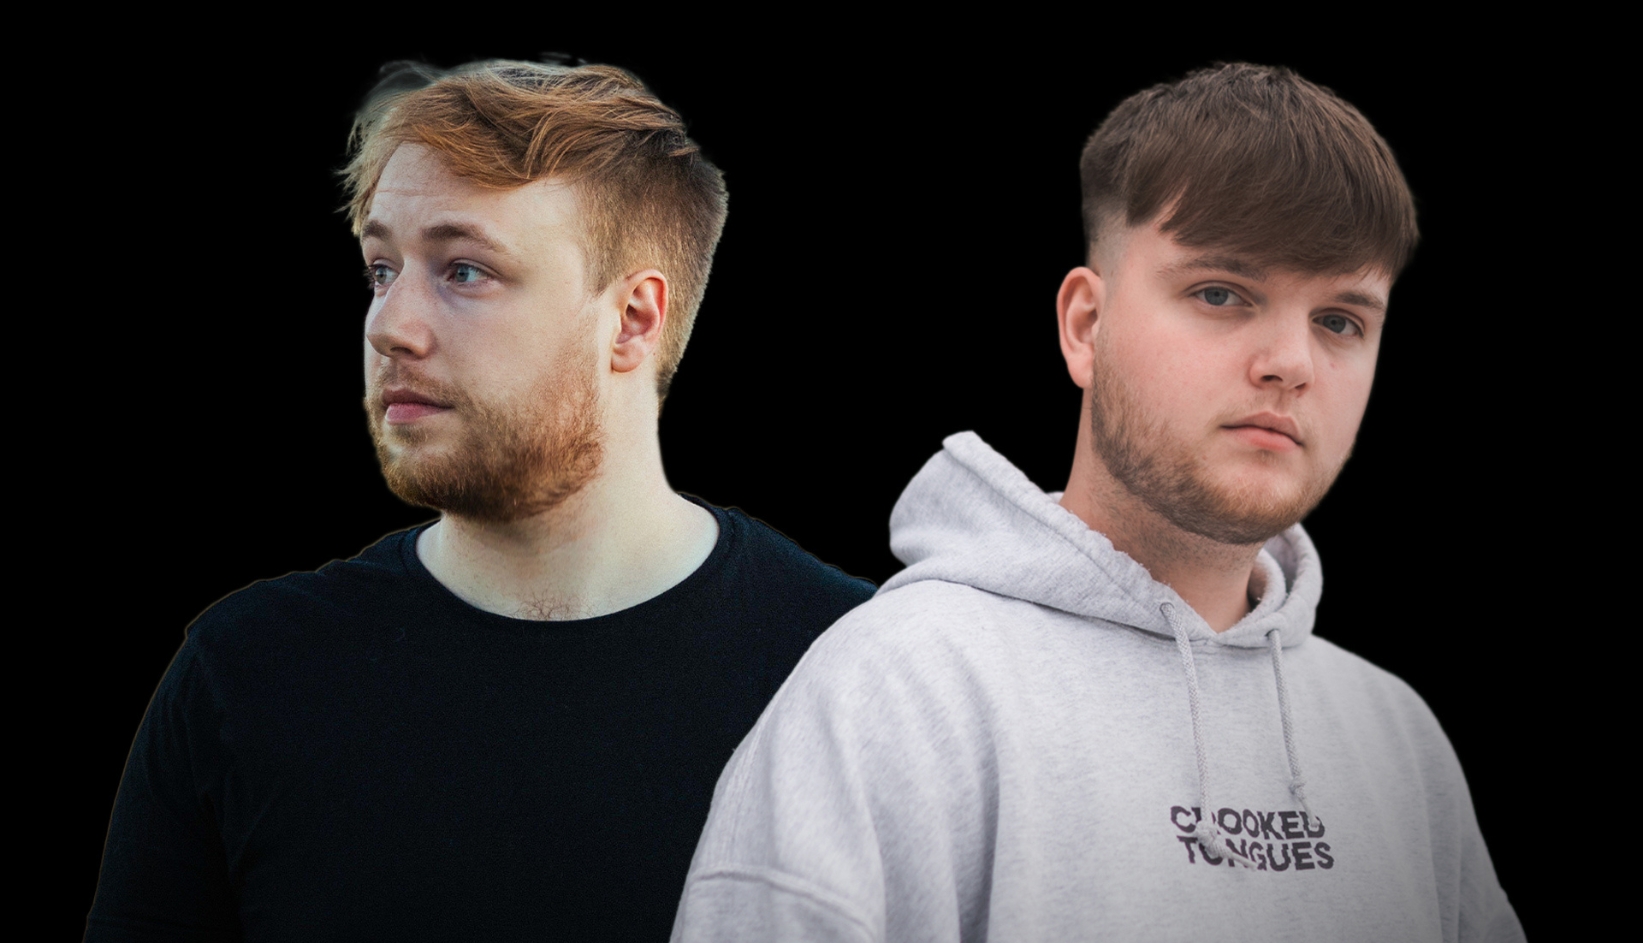 Rising Stars Jack Kelly & James French Drop New Single ‘See You Again’ on Perfect Havoc